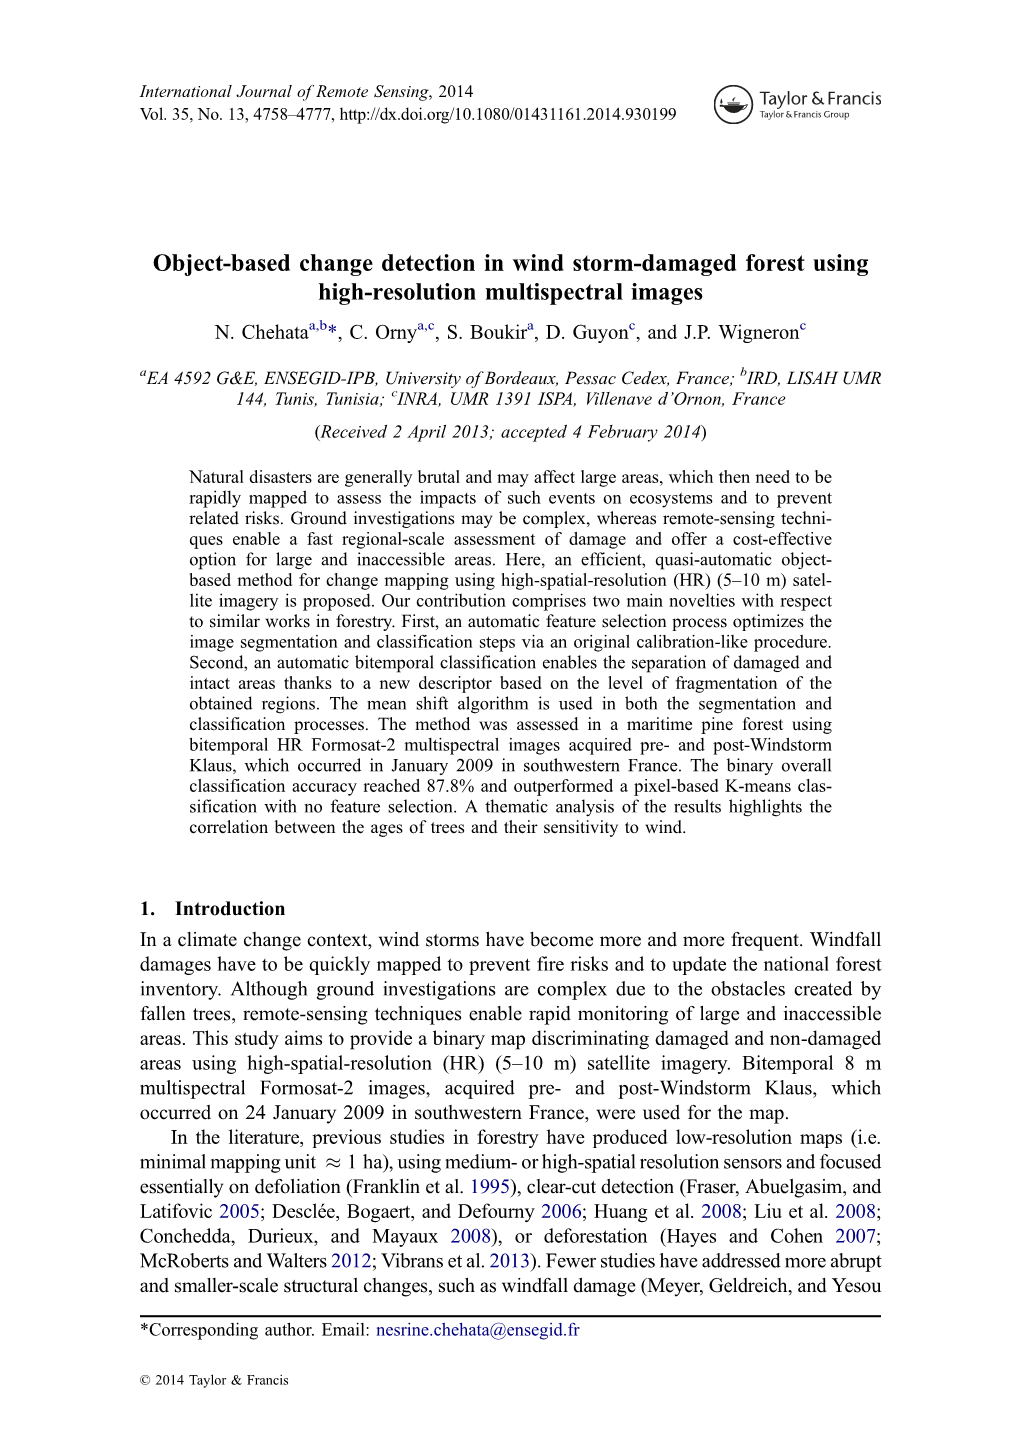 Object-Based Change Detection in Wind Storm-Damaged Forest Using High-Resolution Multispectral Images N